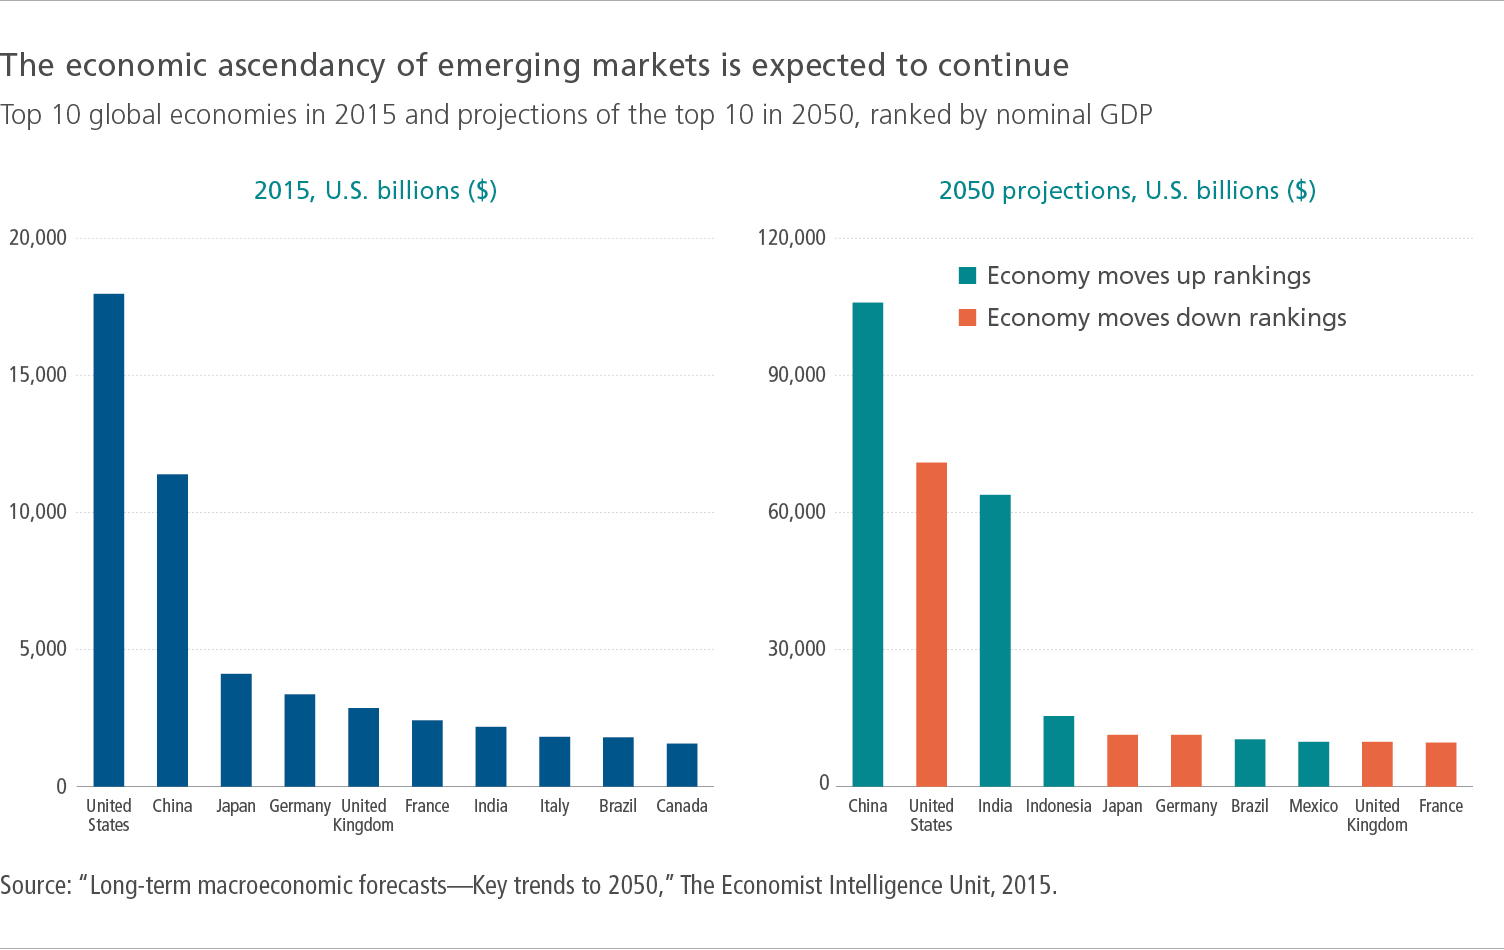 The economic ascendancy of emerging markets is expected to continue